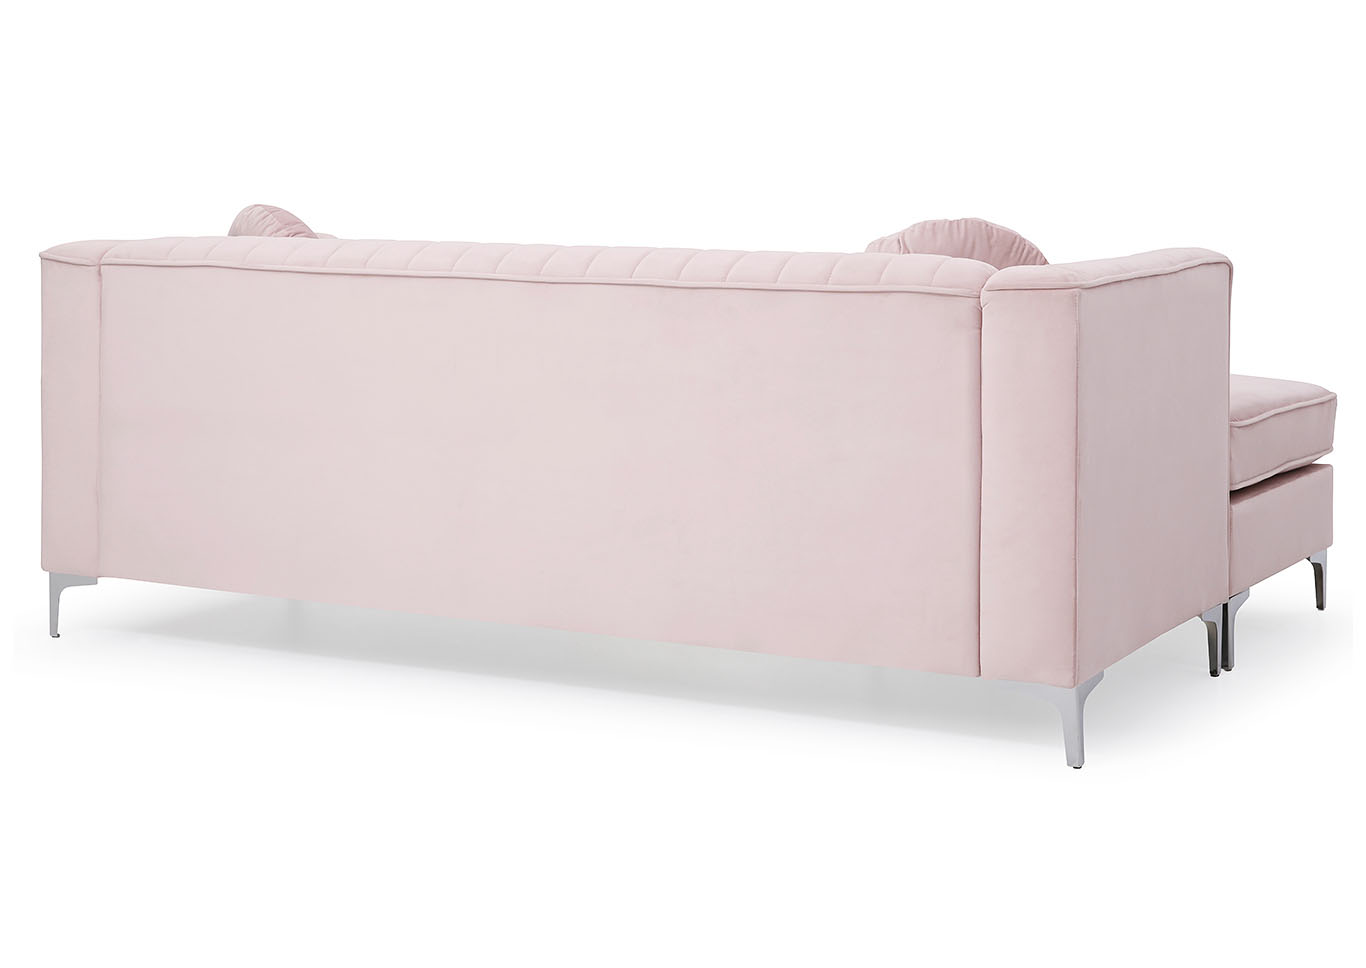 Delray Pink Chaise,Glory Furniture